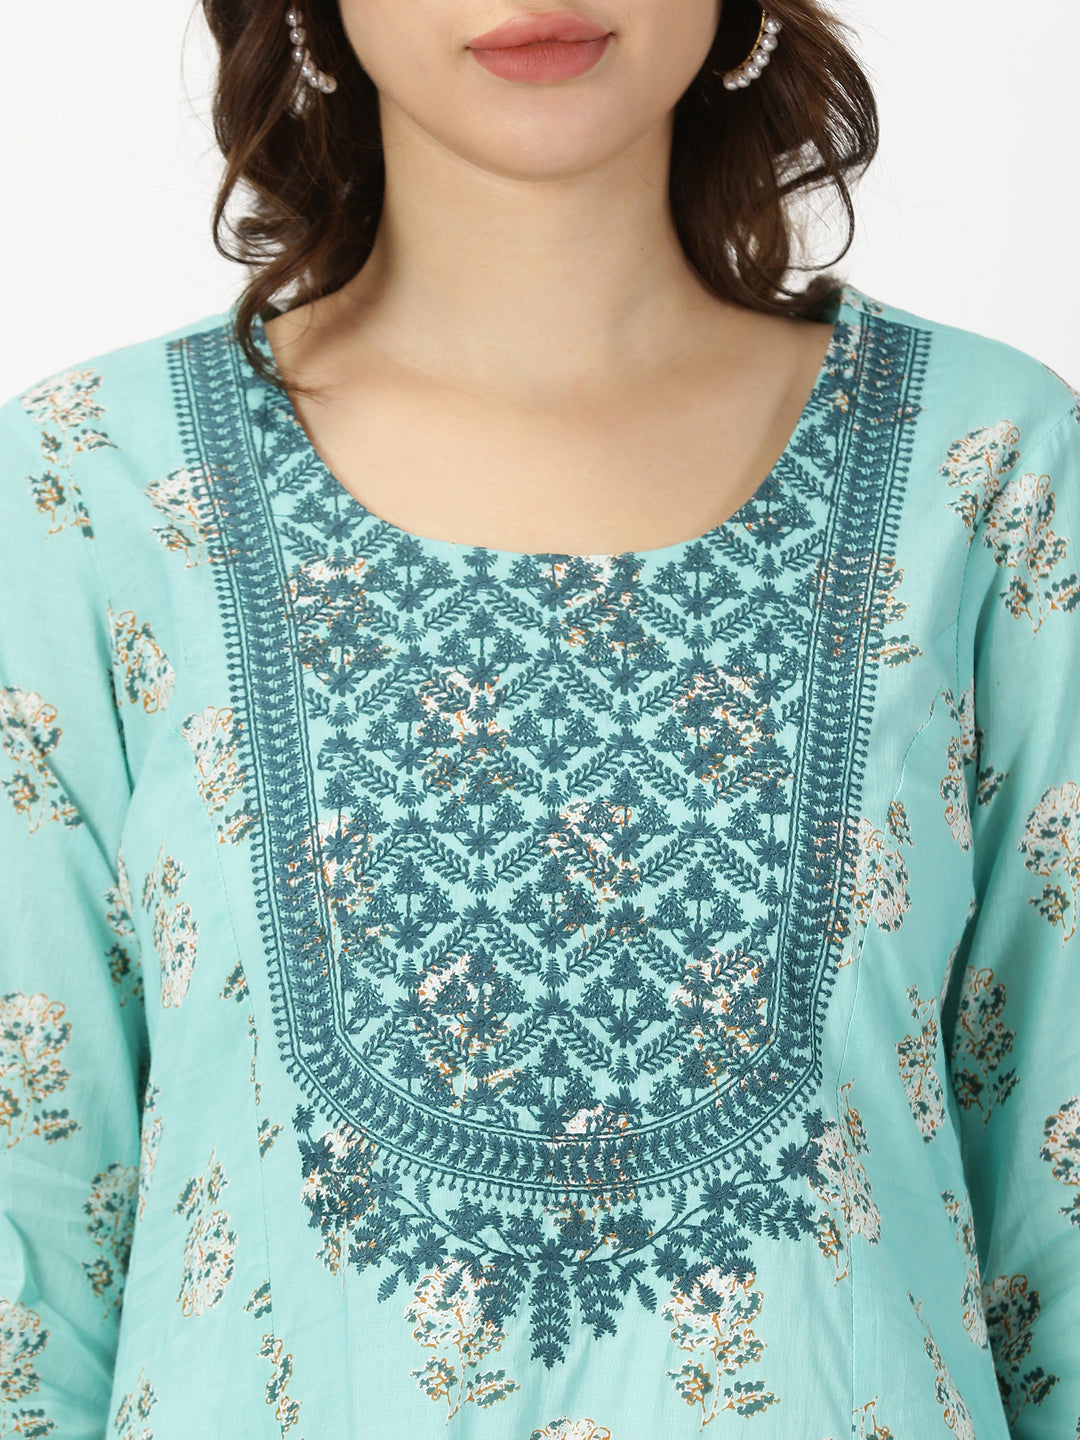 Turquoise Blue Floral Print Kurta with Yoke Embroidery